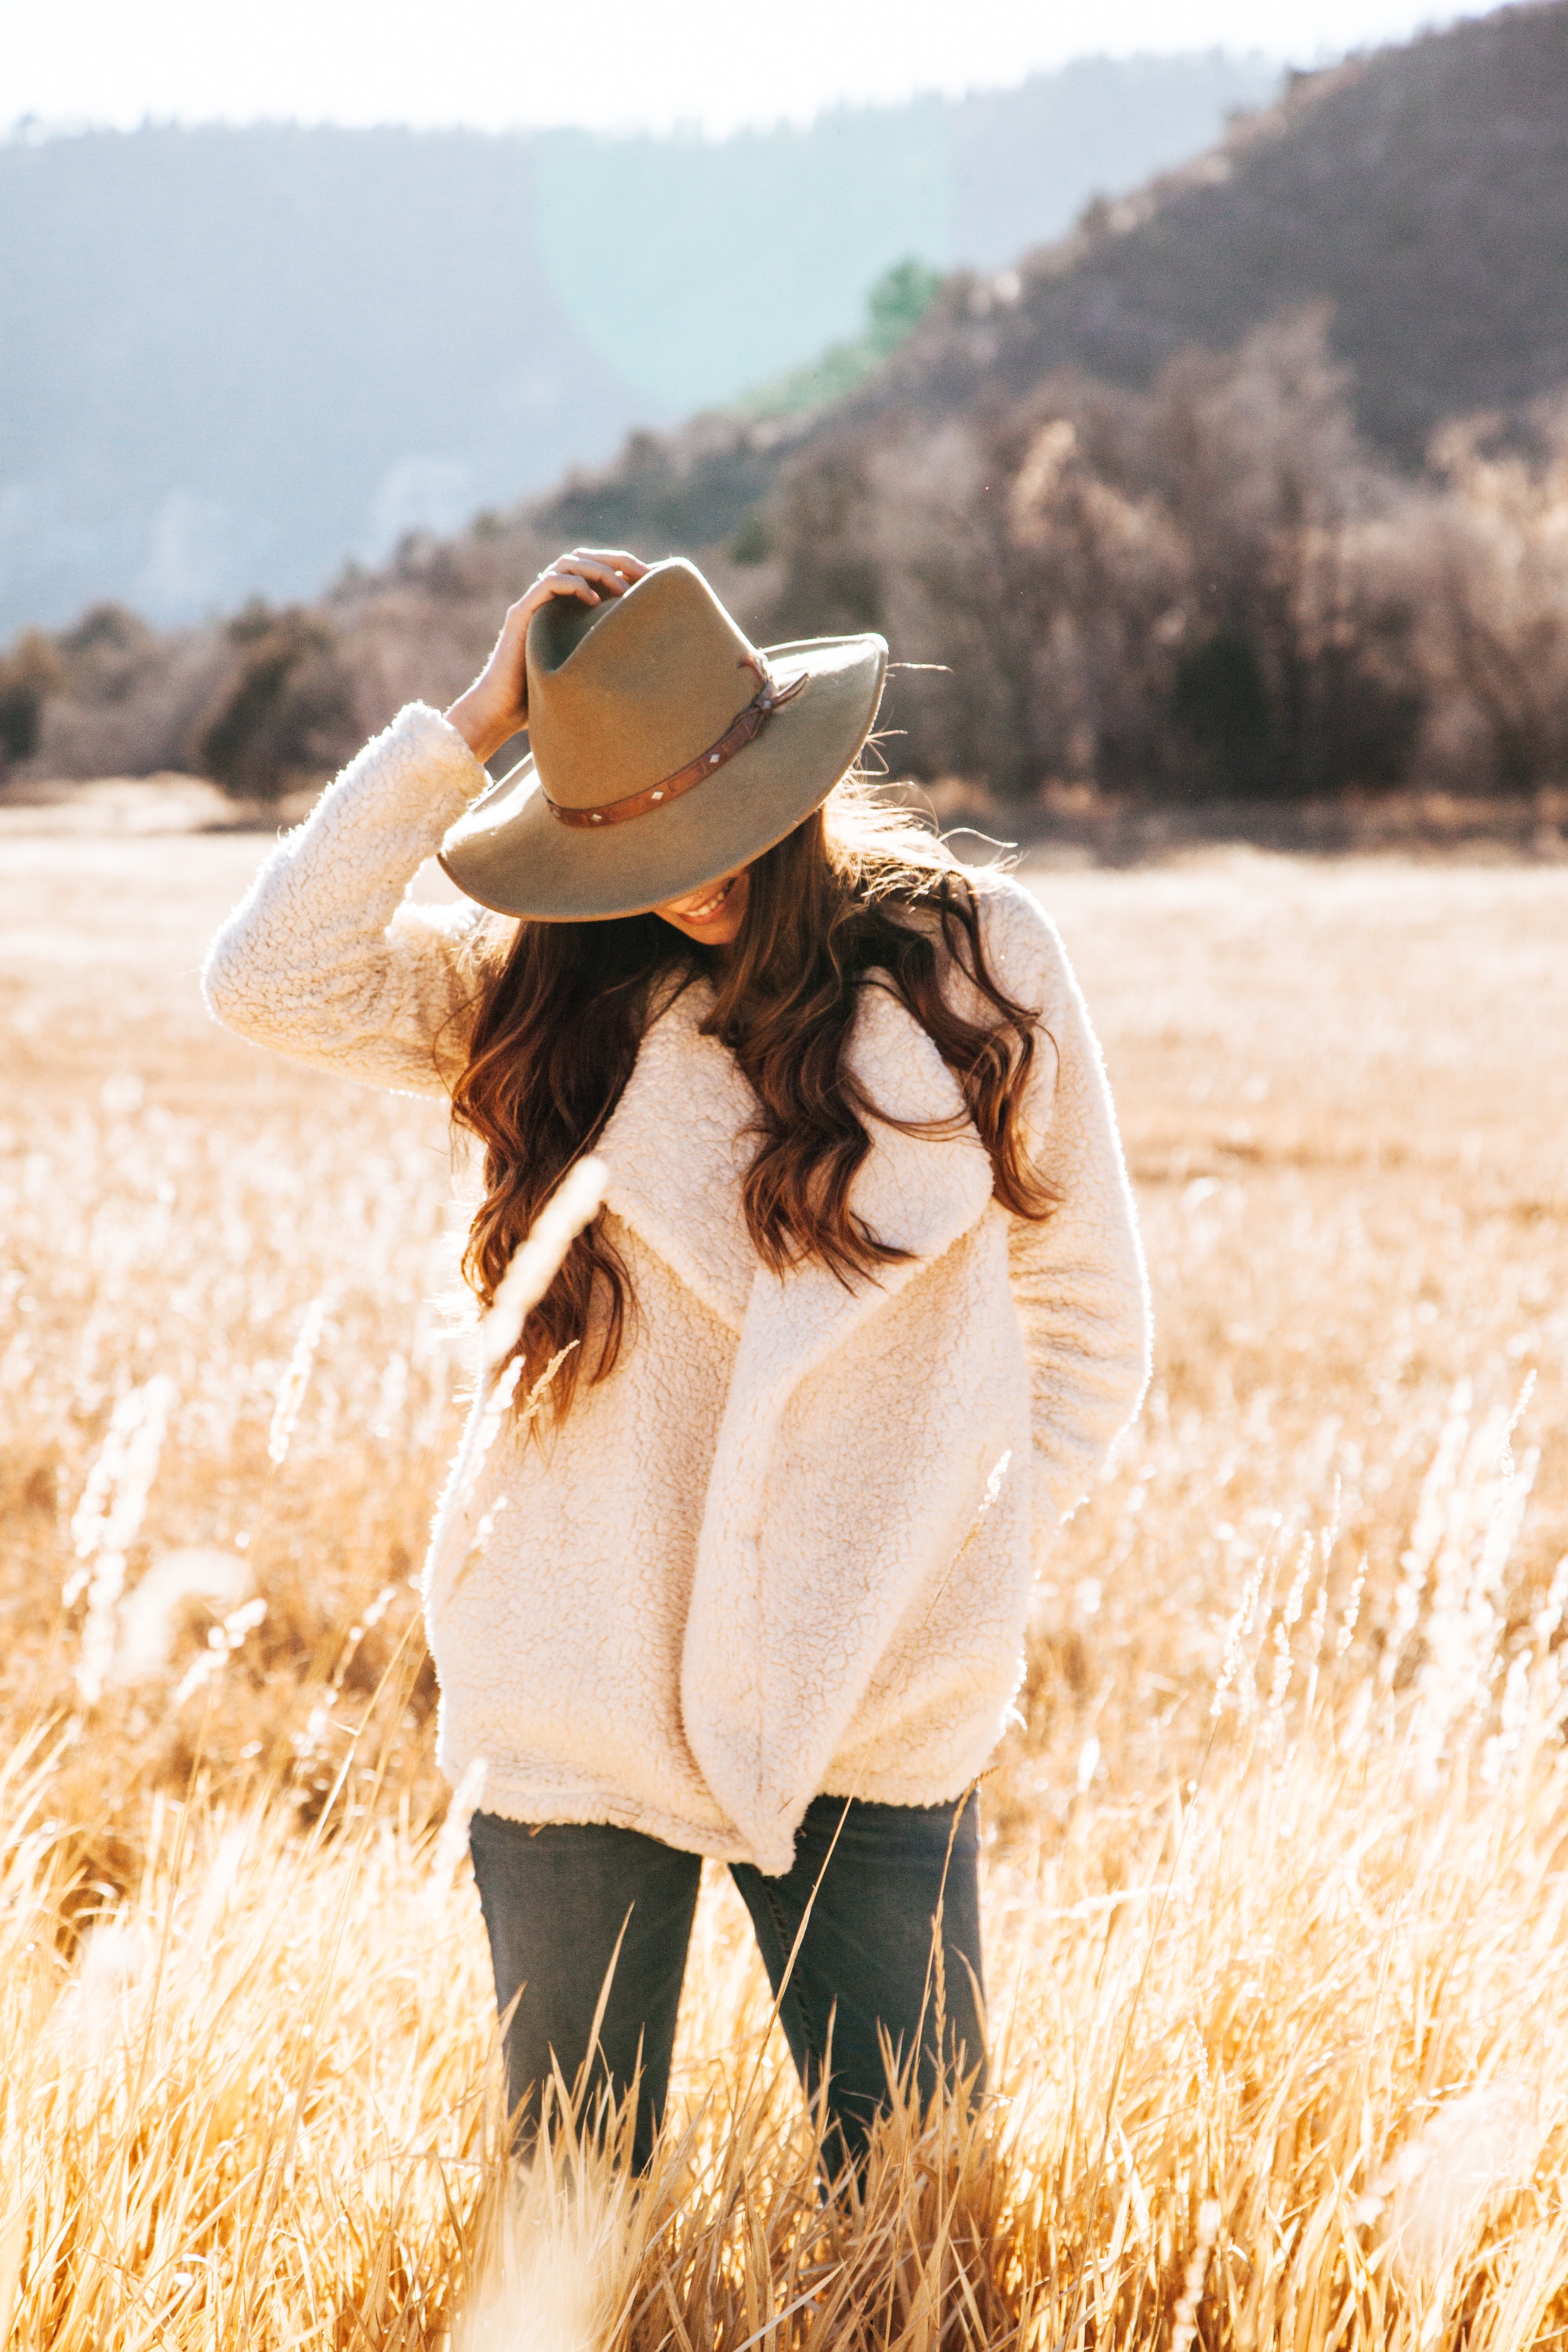 Smiling Woman in White Winter Jacket Wearing Brown Cowboy Hat Surrounded of Brown Grass Field, Adult, Photoshoot, Model, Nature, HQ Photo